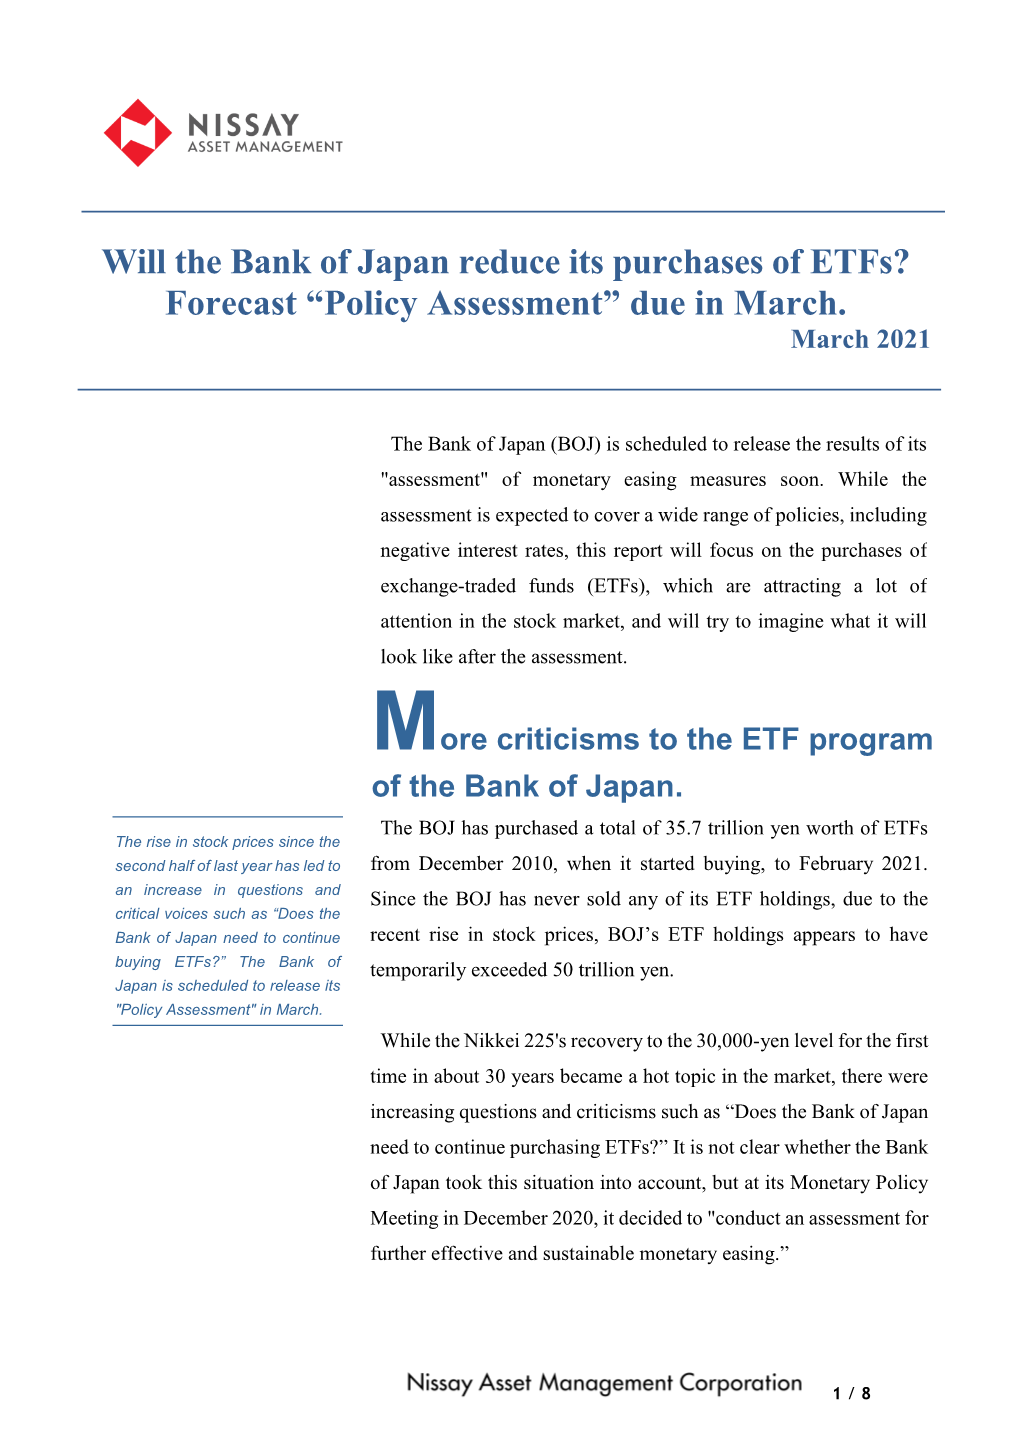 Will the Bank of Japan Reduce Its Purchases of Etfs? Forecast “Policy Assessment” Due in March